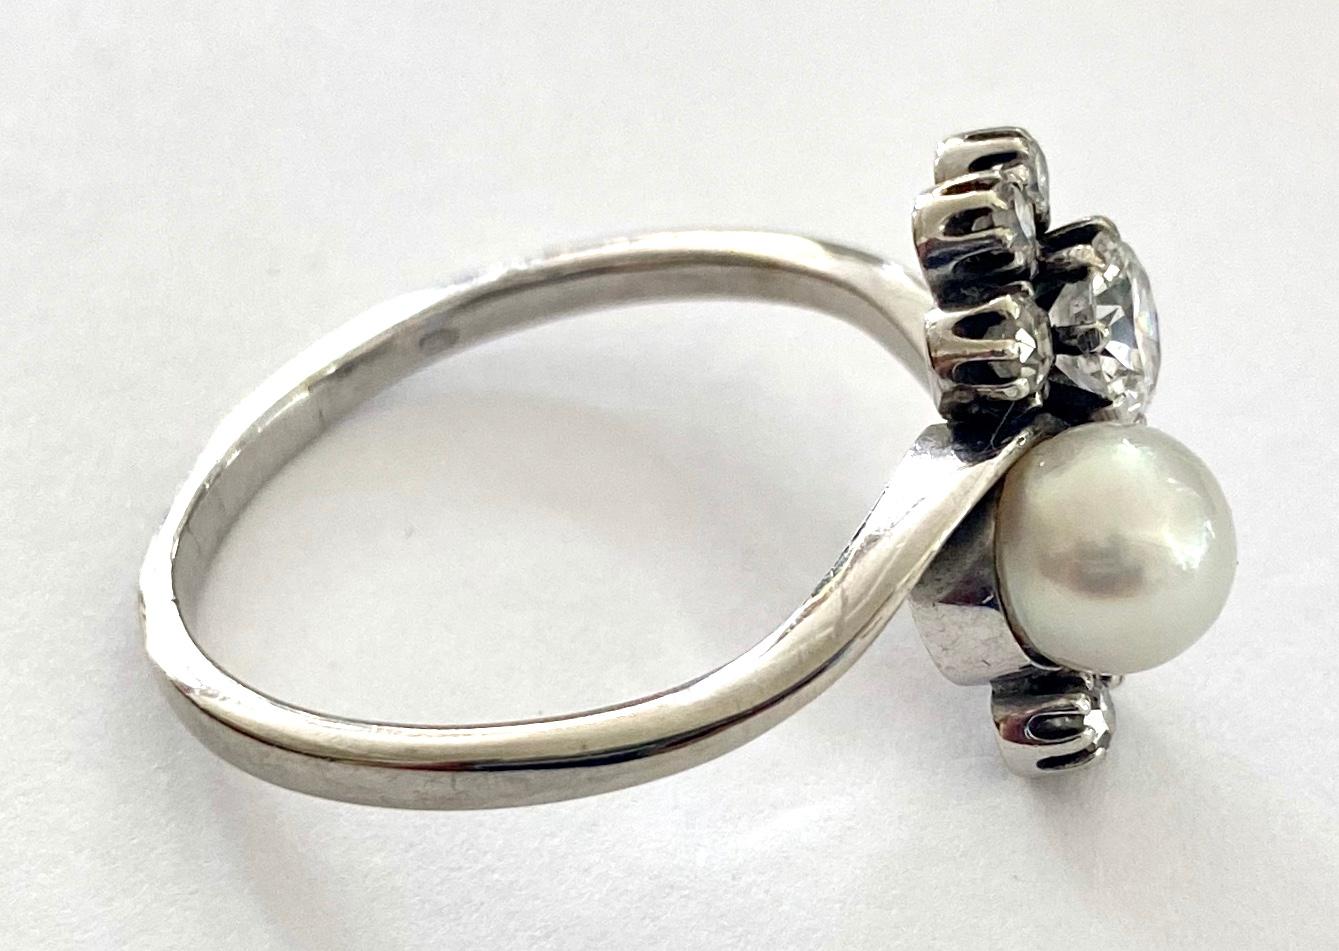 Brilliant Cut One '1' 14 Karat Gold Ring, Set with Diamonds and One '1' Cultured Pearl, 1940